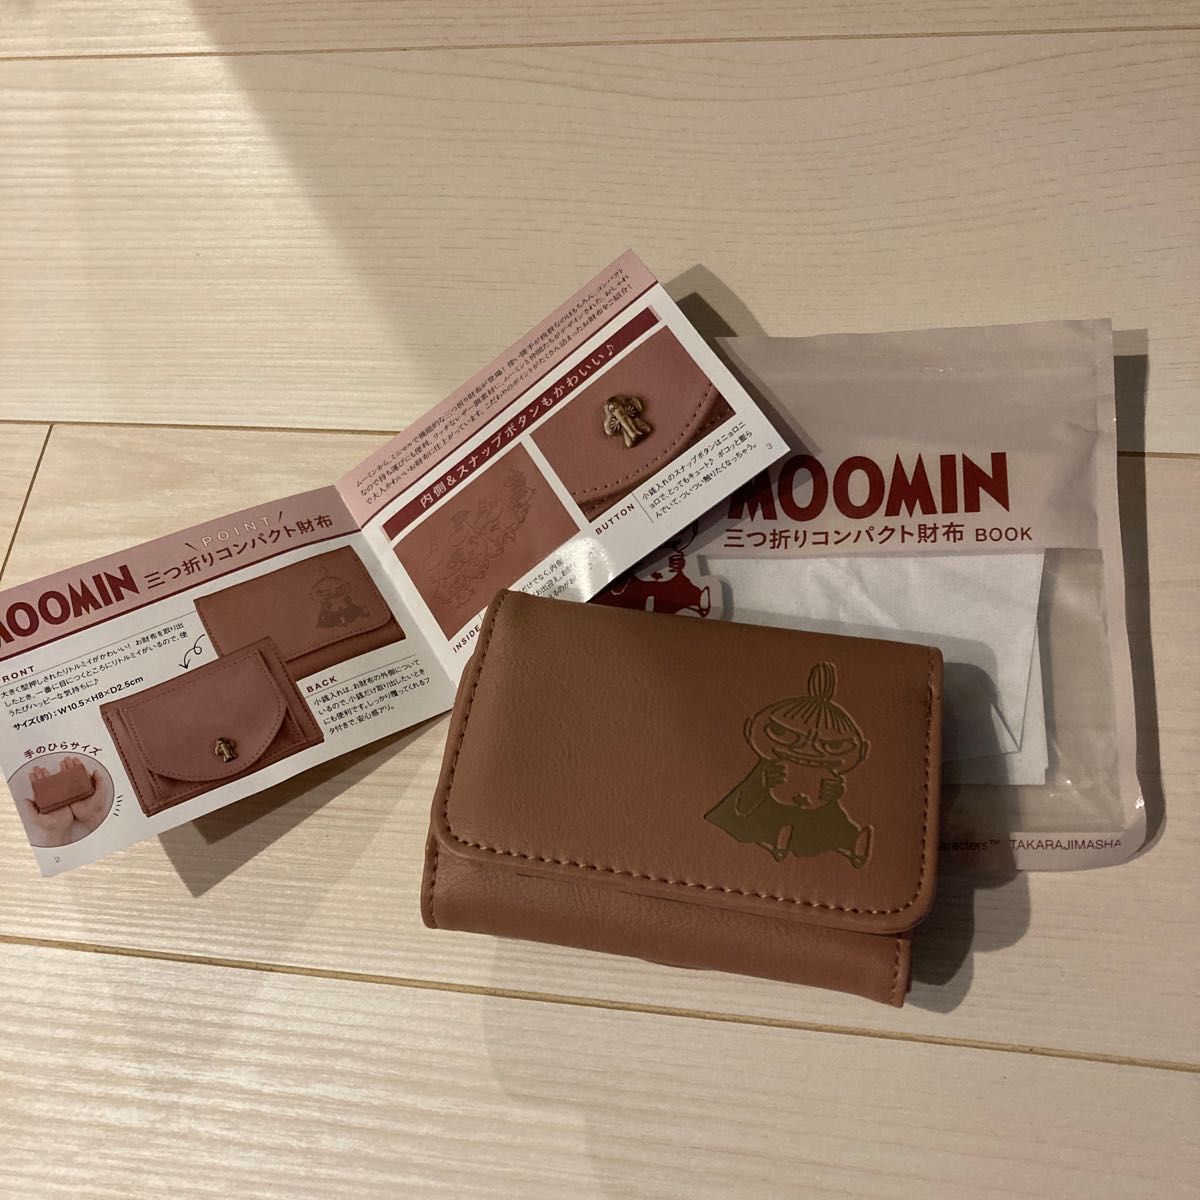 MOOMIN 三つ折りコンパクト財布 BOOK BROWN